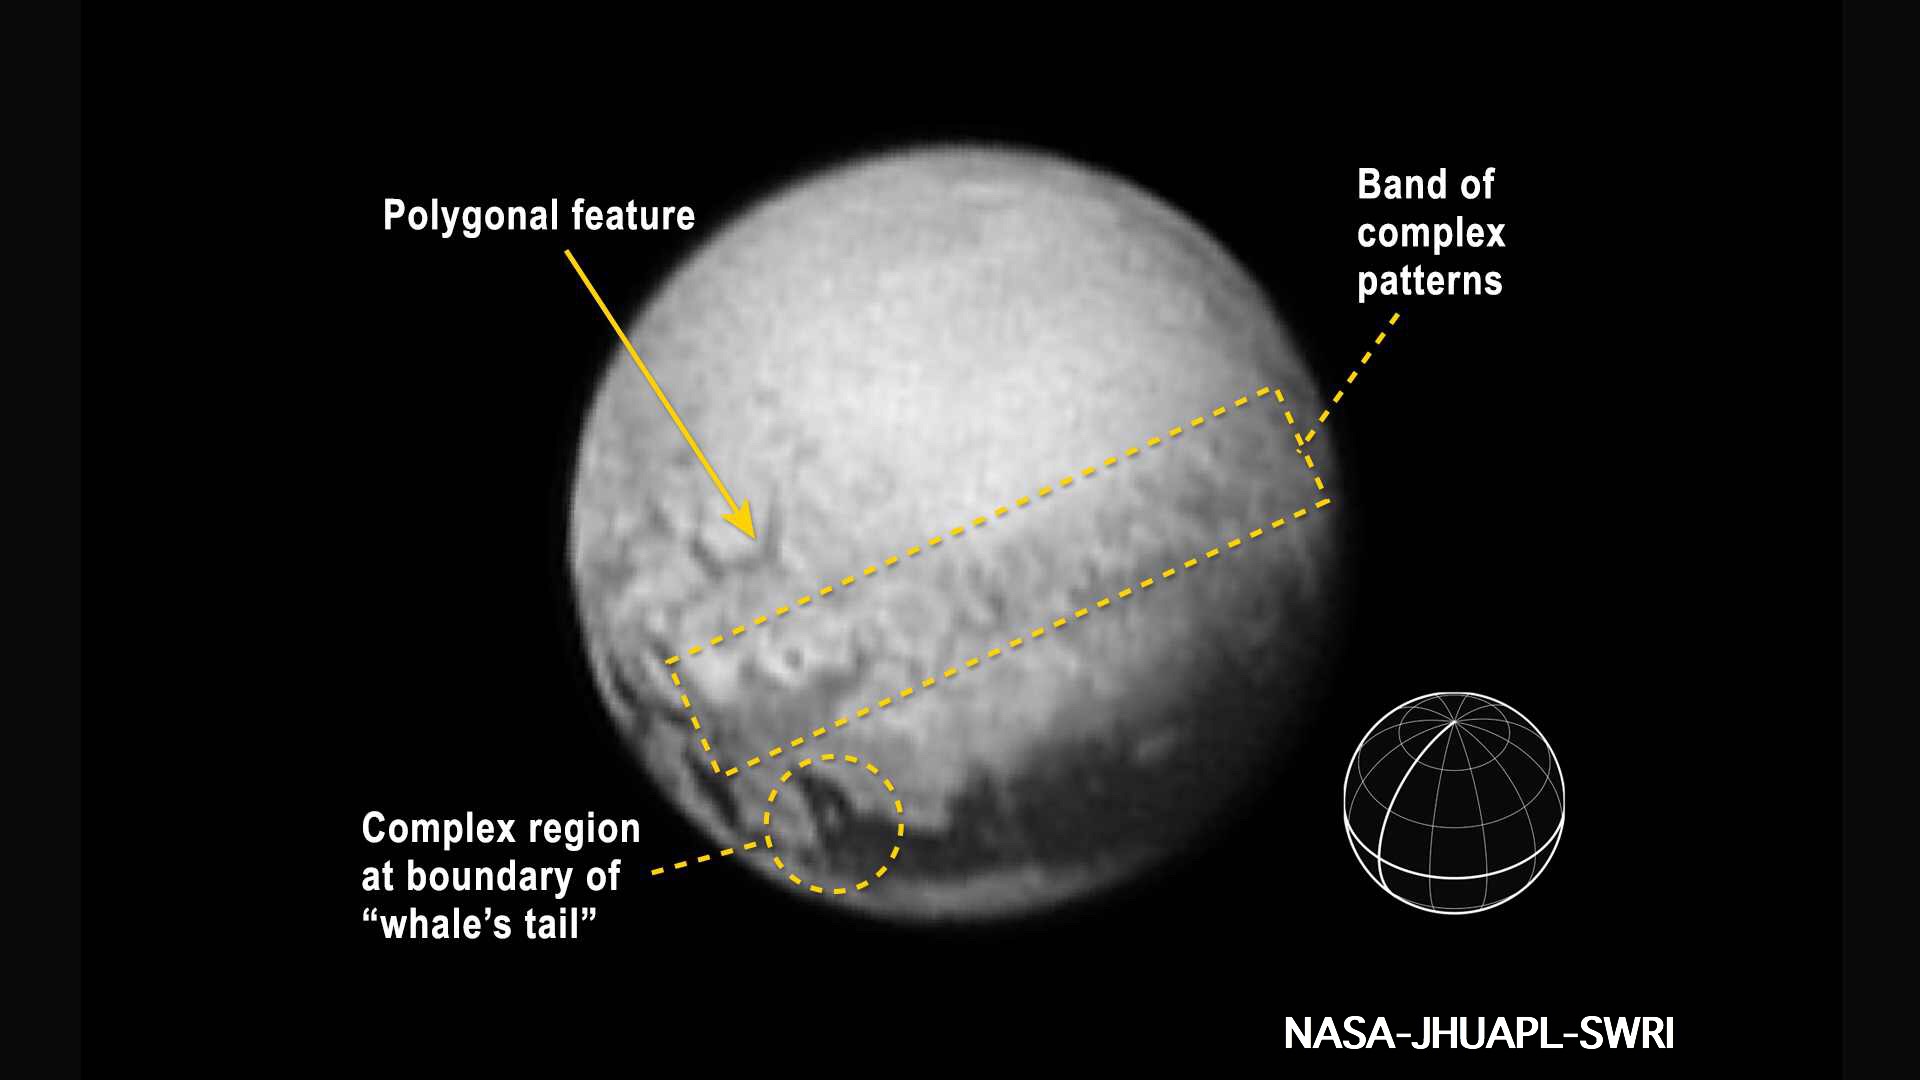 Pluto's fascinating terrain and various geologic features are revealed in detail in this latest black-and-white image from NASA's New Horizons spacecraft. The image was taken with the onboard Long Range Reconnaissance Imager, or LORRI on July 9, while New Horizons was approximately 5.4 million km away from the dwarf planet. Image Credit: NASA/JHUAPL/SWRI